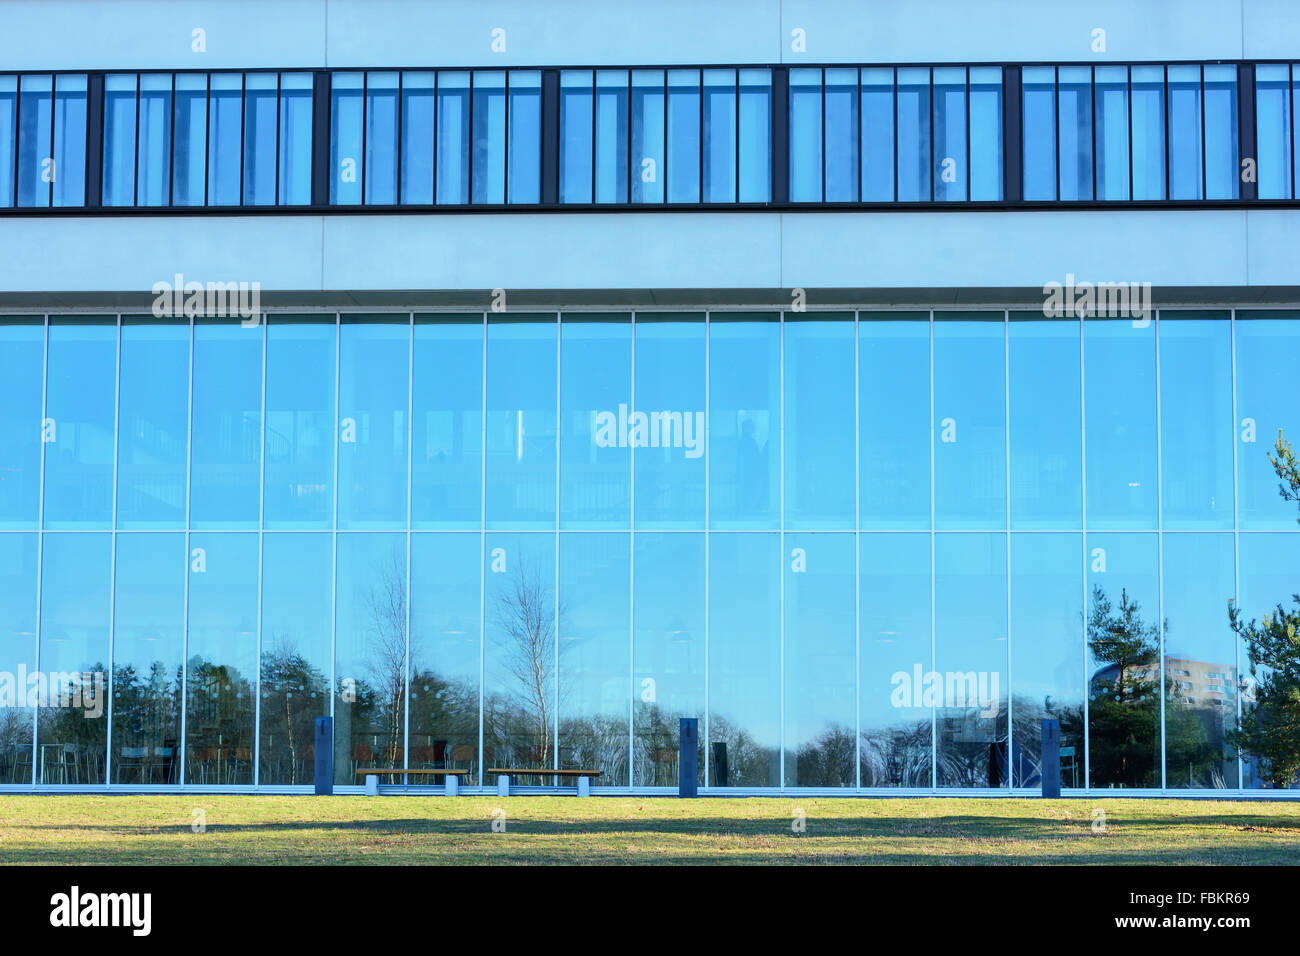 Karlskrona, Sweden - January 13, 2016: The glass facade of Blekinge Institute of Technology (BTH) as seen from the west. The sky Stock Photo